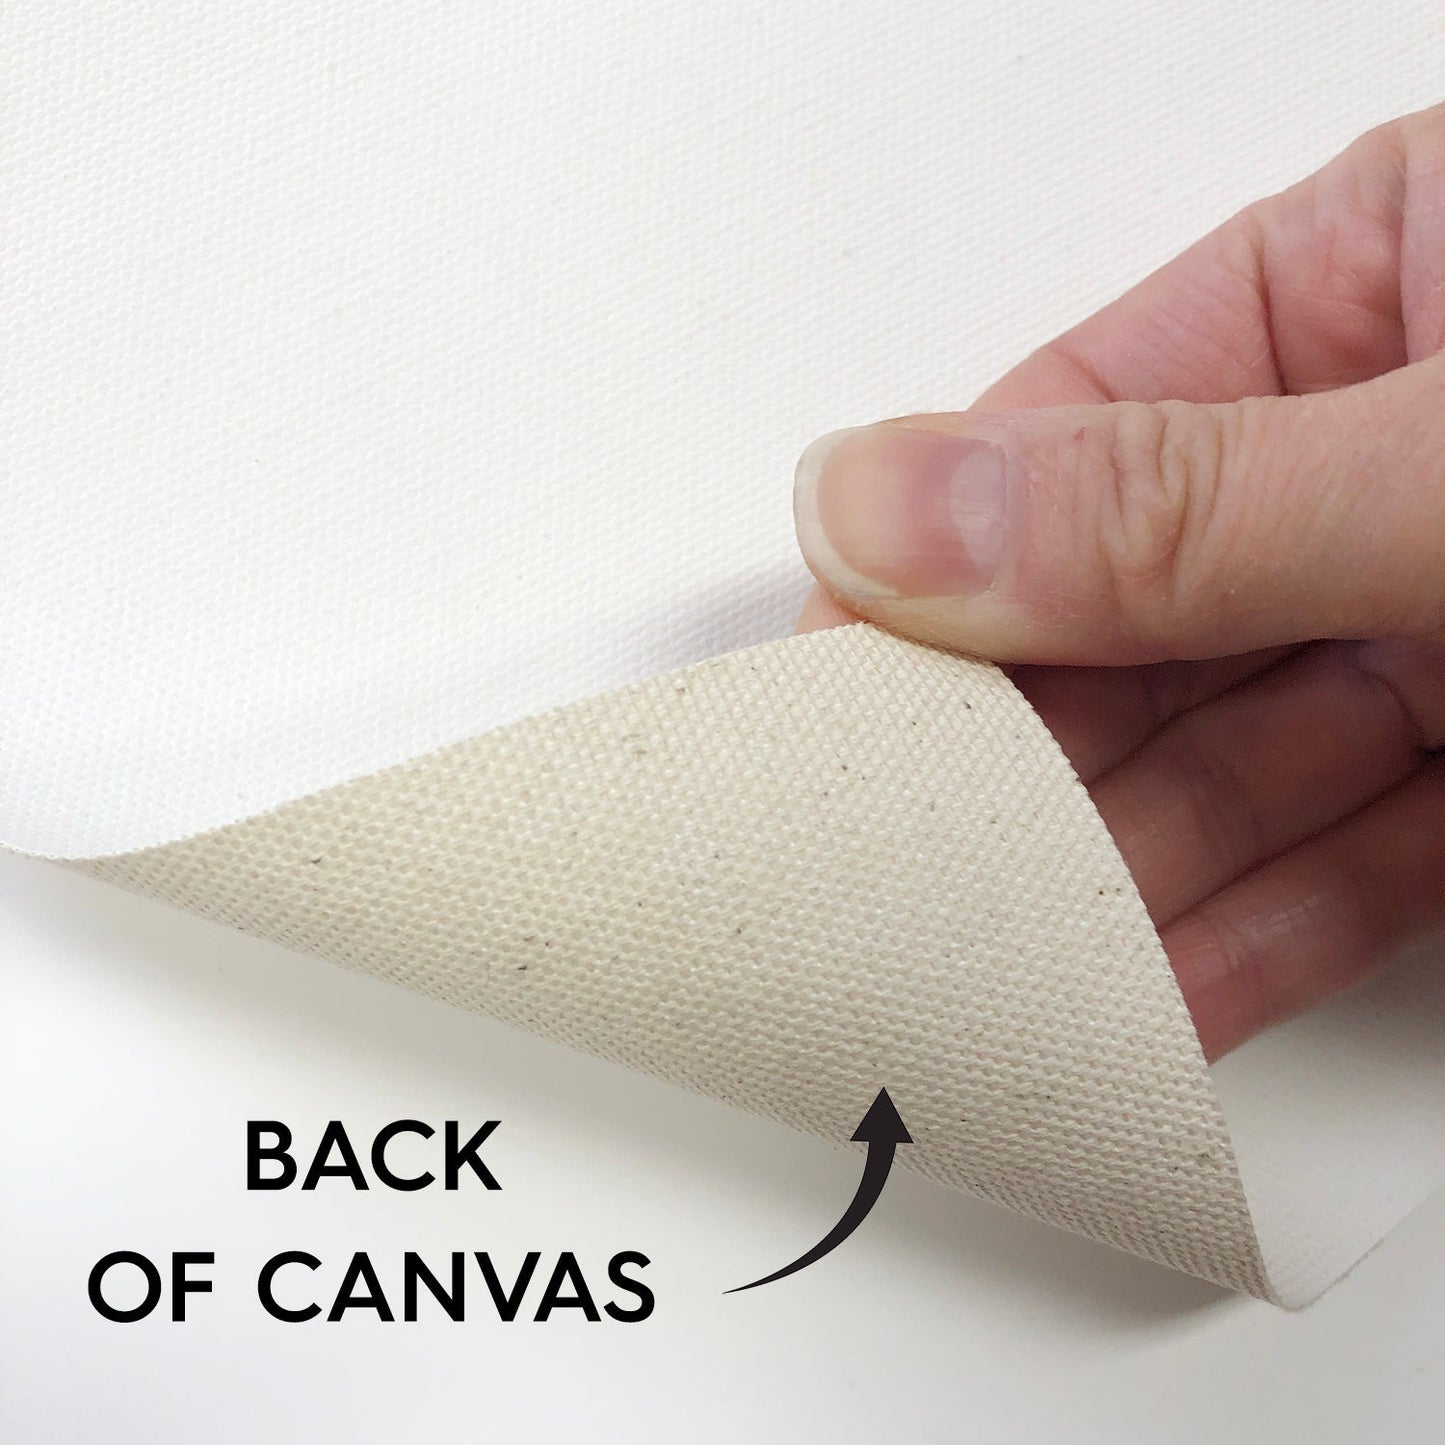 11x14" Canvas Blanks for Painting - Flat Unstretched 100% Cotton Sheets - Hanger Frames